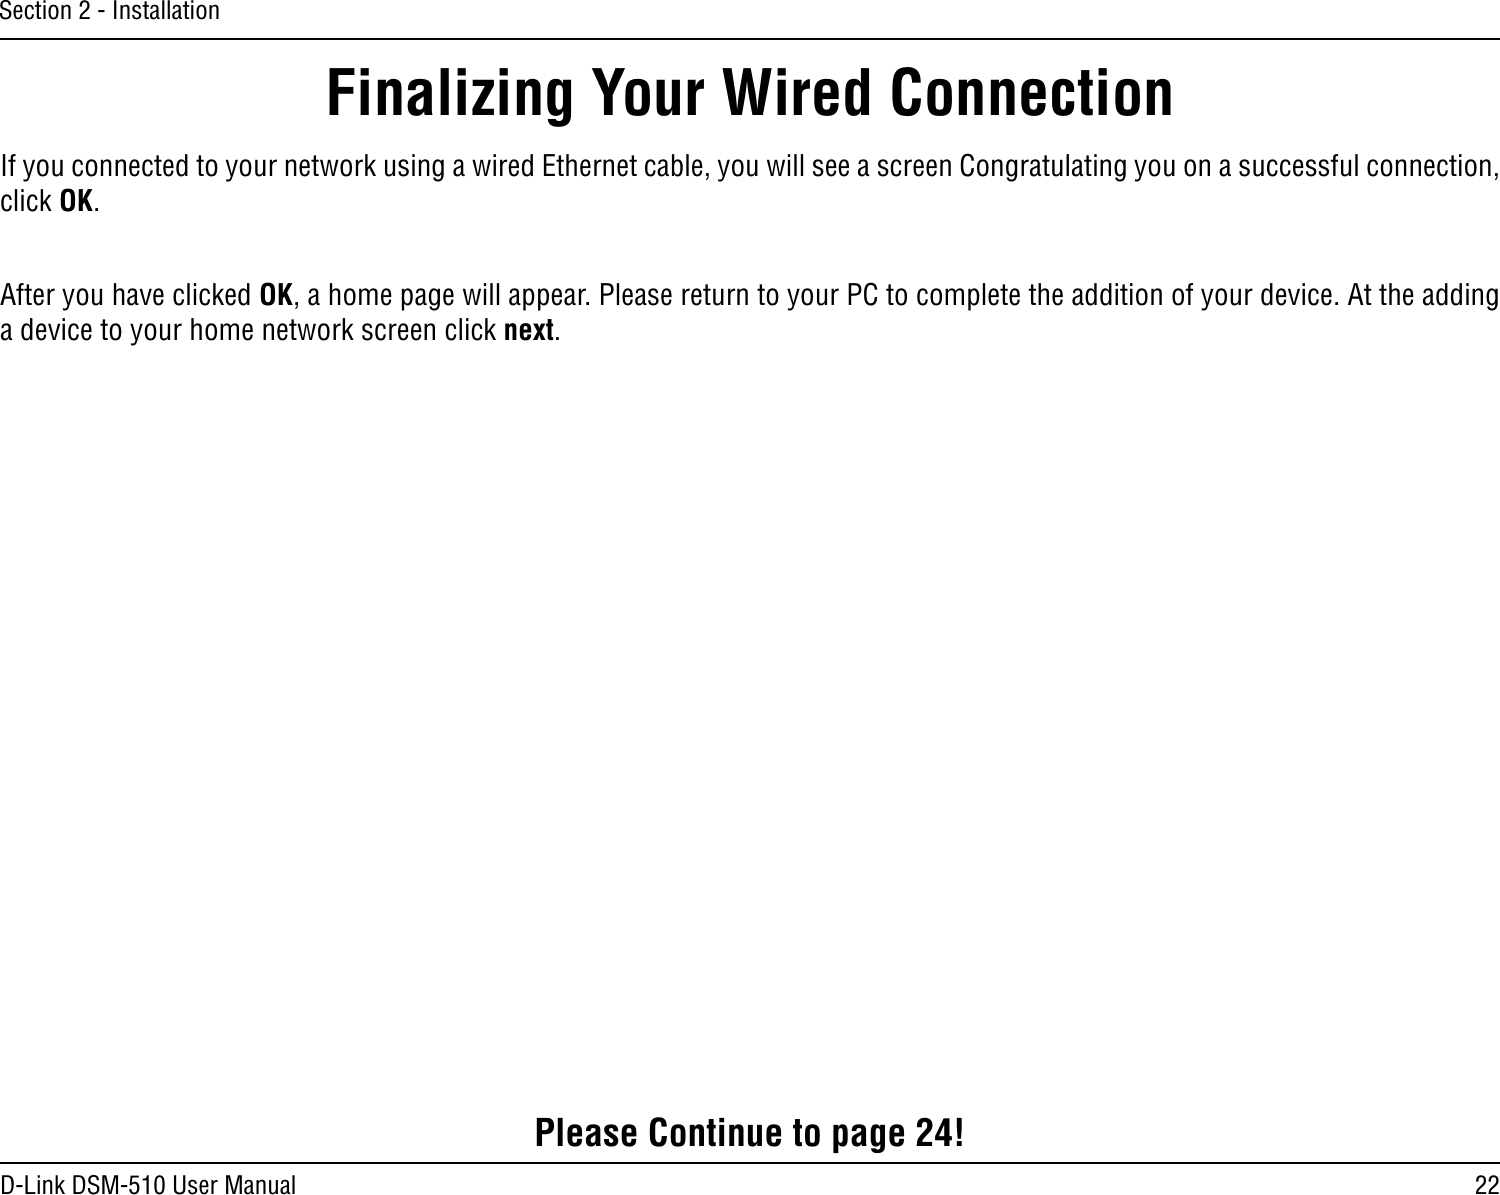 22D-Link DSM-510 User ManualSection 2 - InstallationIf you connected to your network using a wired Ethernet cable, you will see a screen Congratulating you on a successful connection, click OK.After you have clicked OK, a home page will appear. Please return to your PC to complete the addition of your device. At the adding a device to your home network screen click next.Finalizing Your Wired ConnectionPlease Continue to page 24!